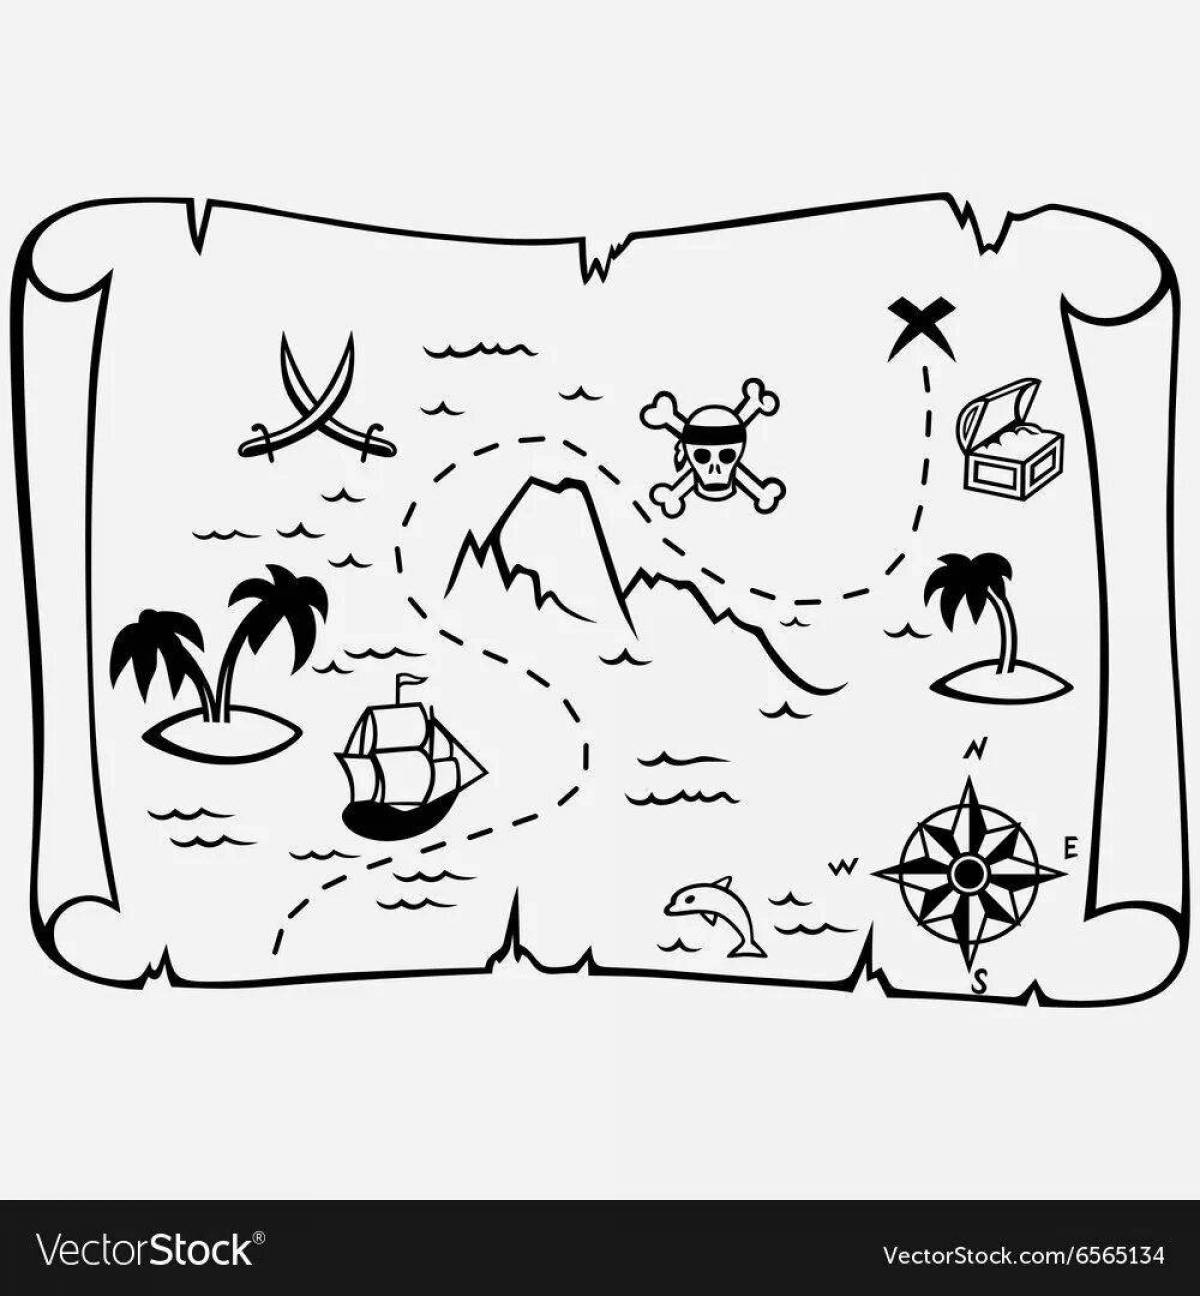 Adorable pirate map coloring page